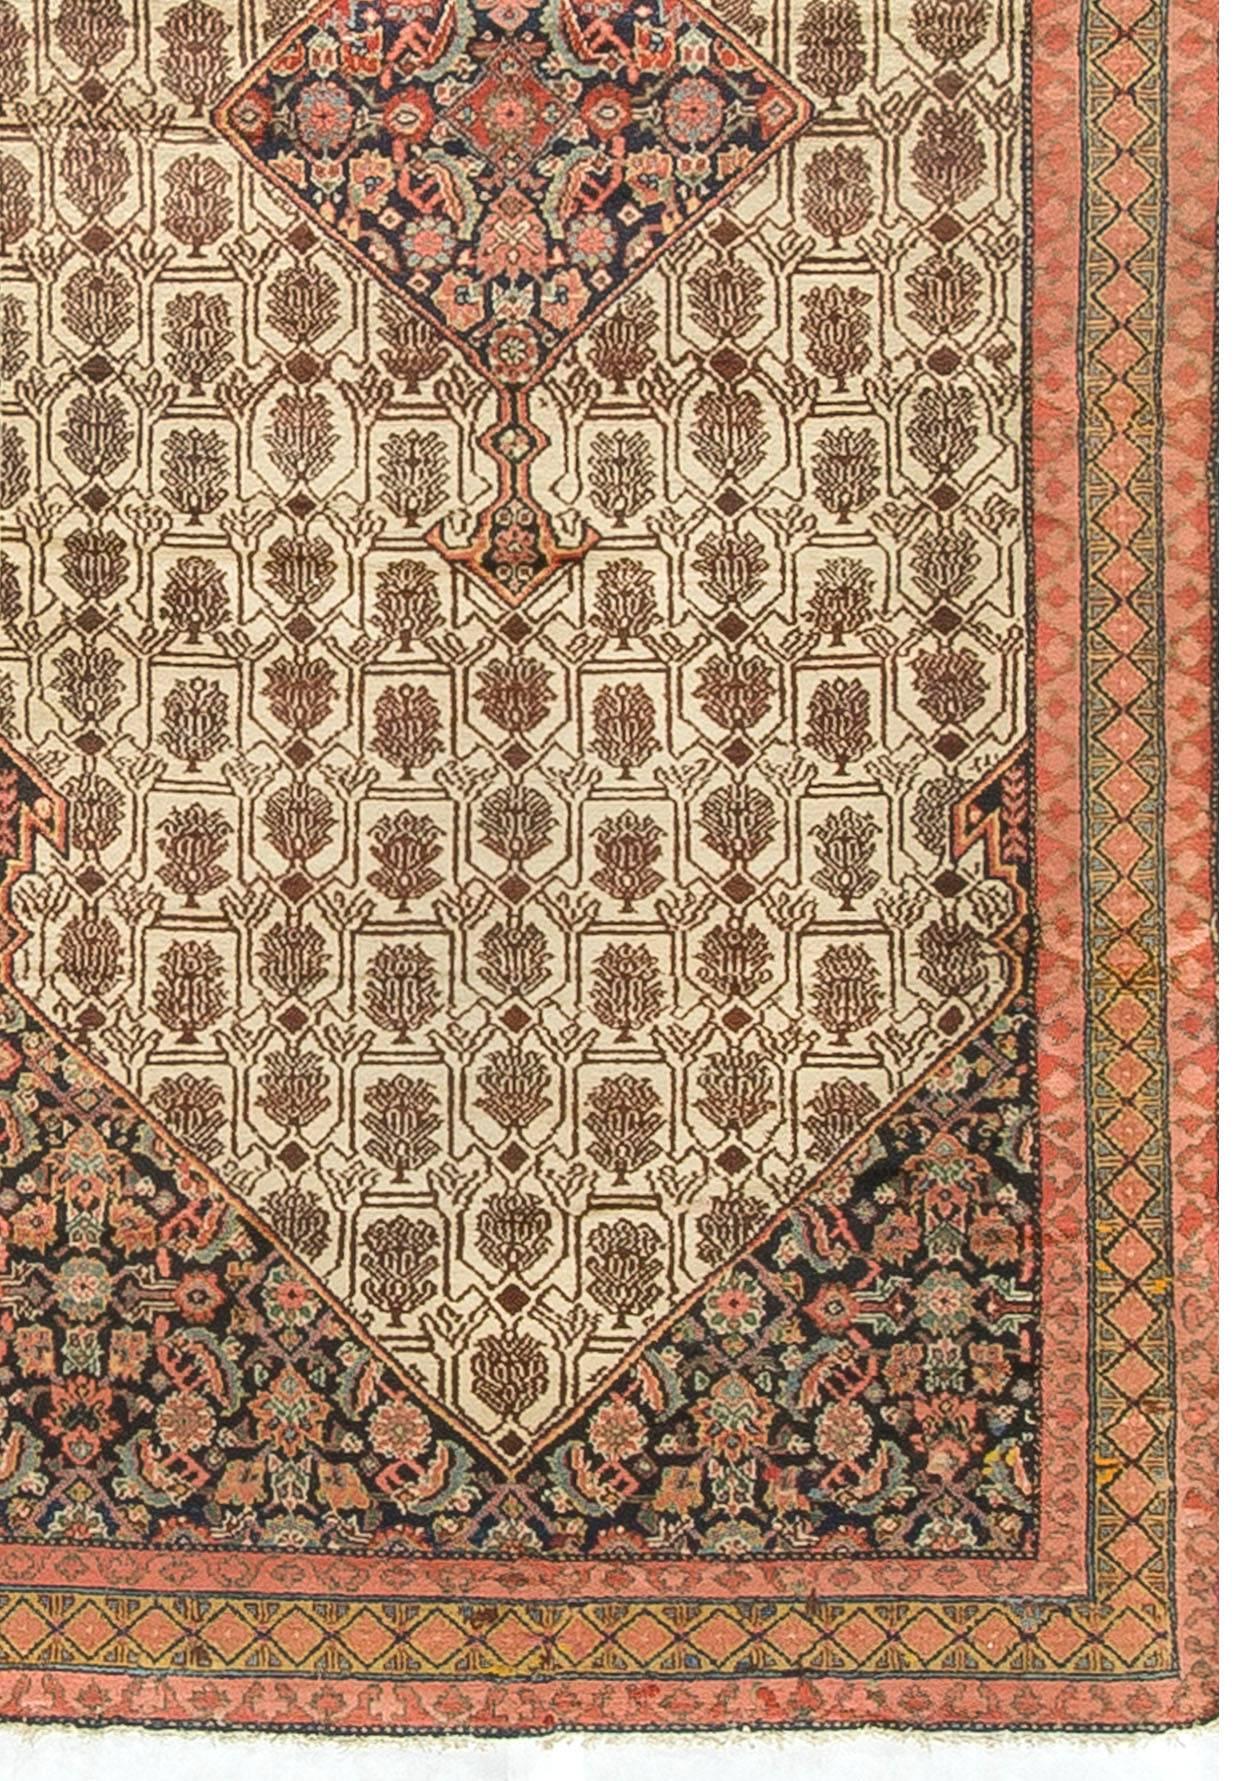 Antique Persian Serab Camel Hair Rug Runner circa 1900  5' x 11' In Good Condition For Sale In Secaucus, NJ